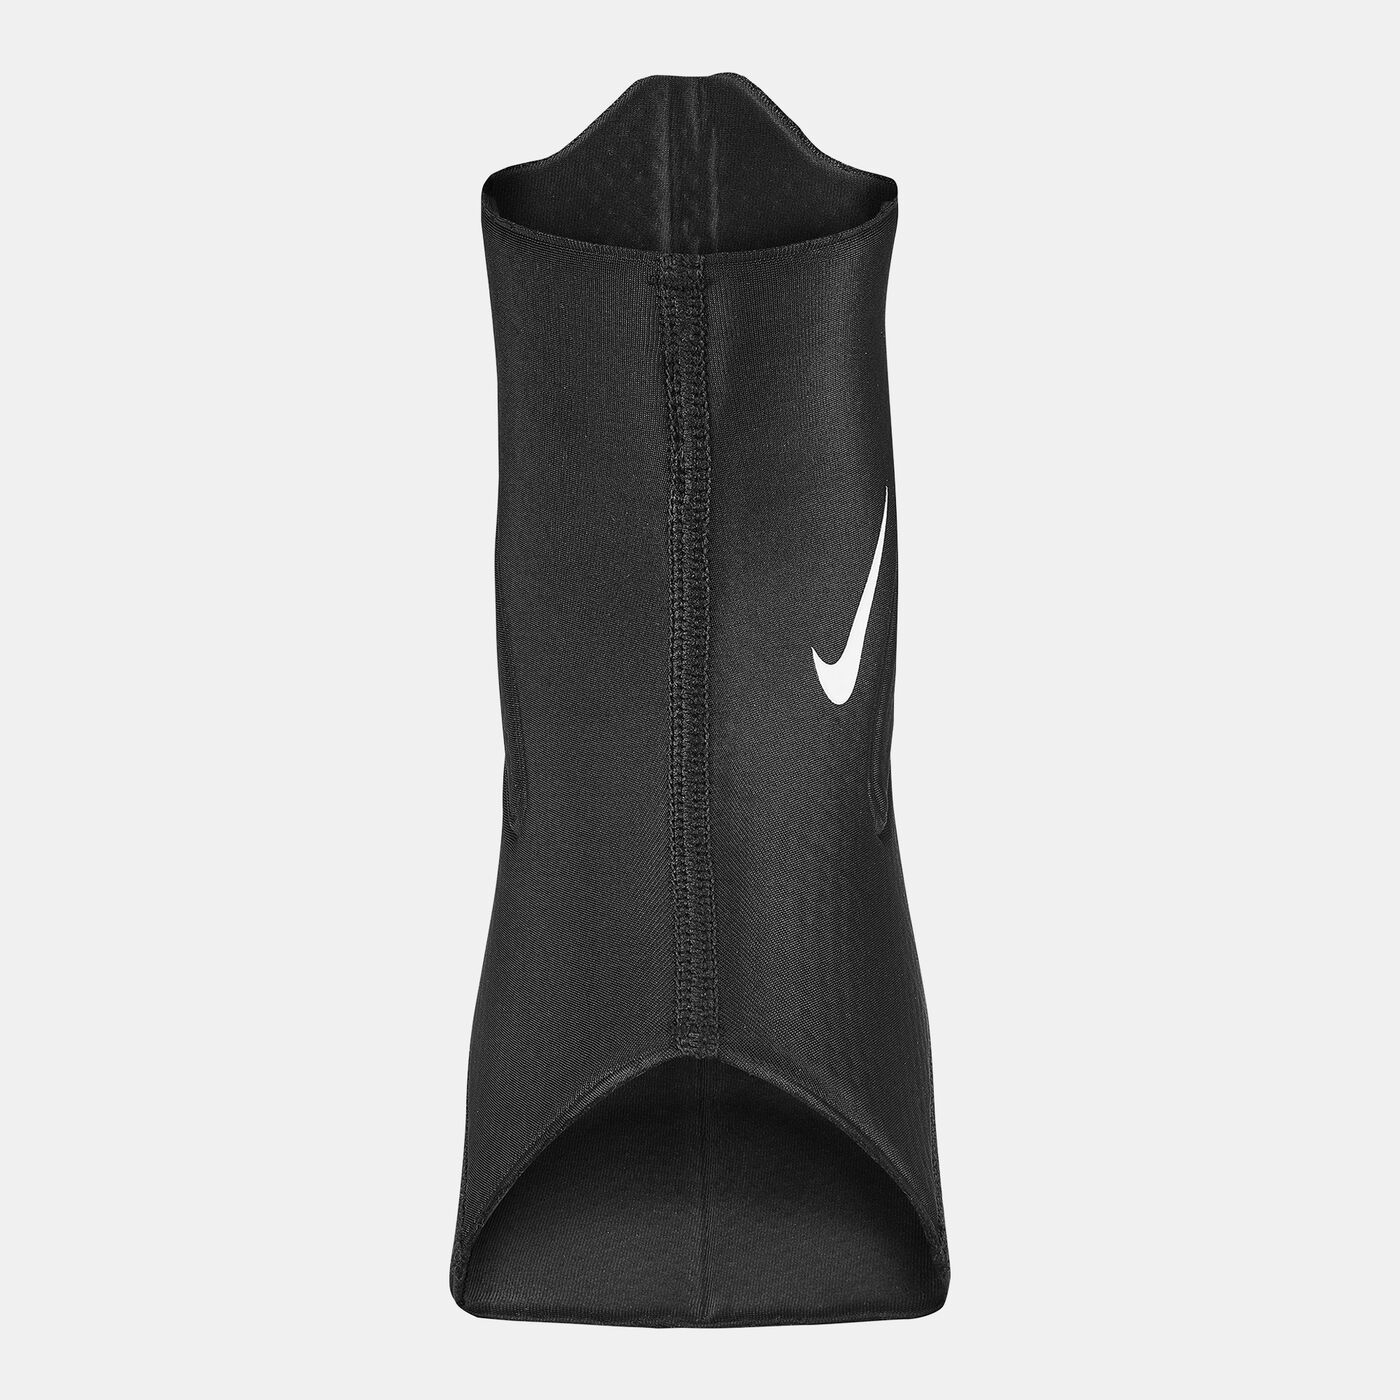 Pro 3.0 Ankle Sleeve (XL)